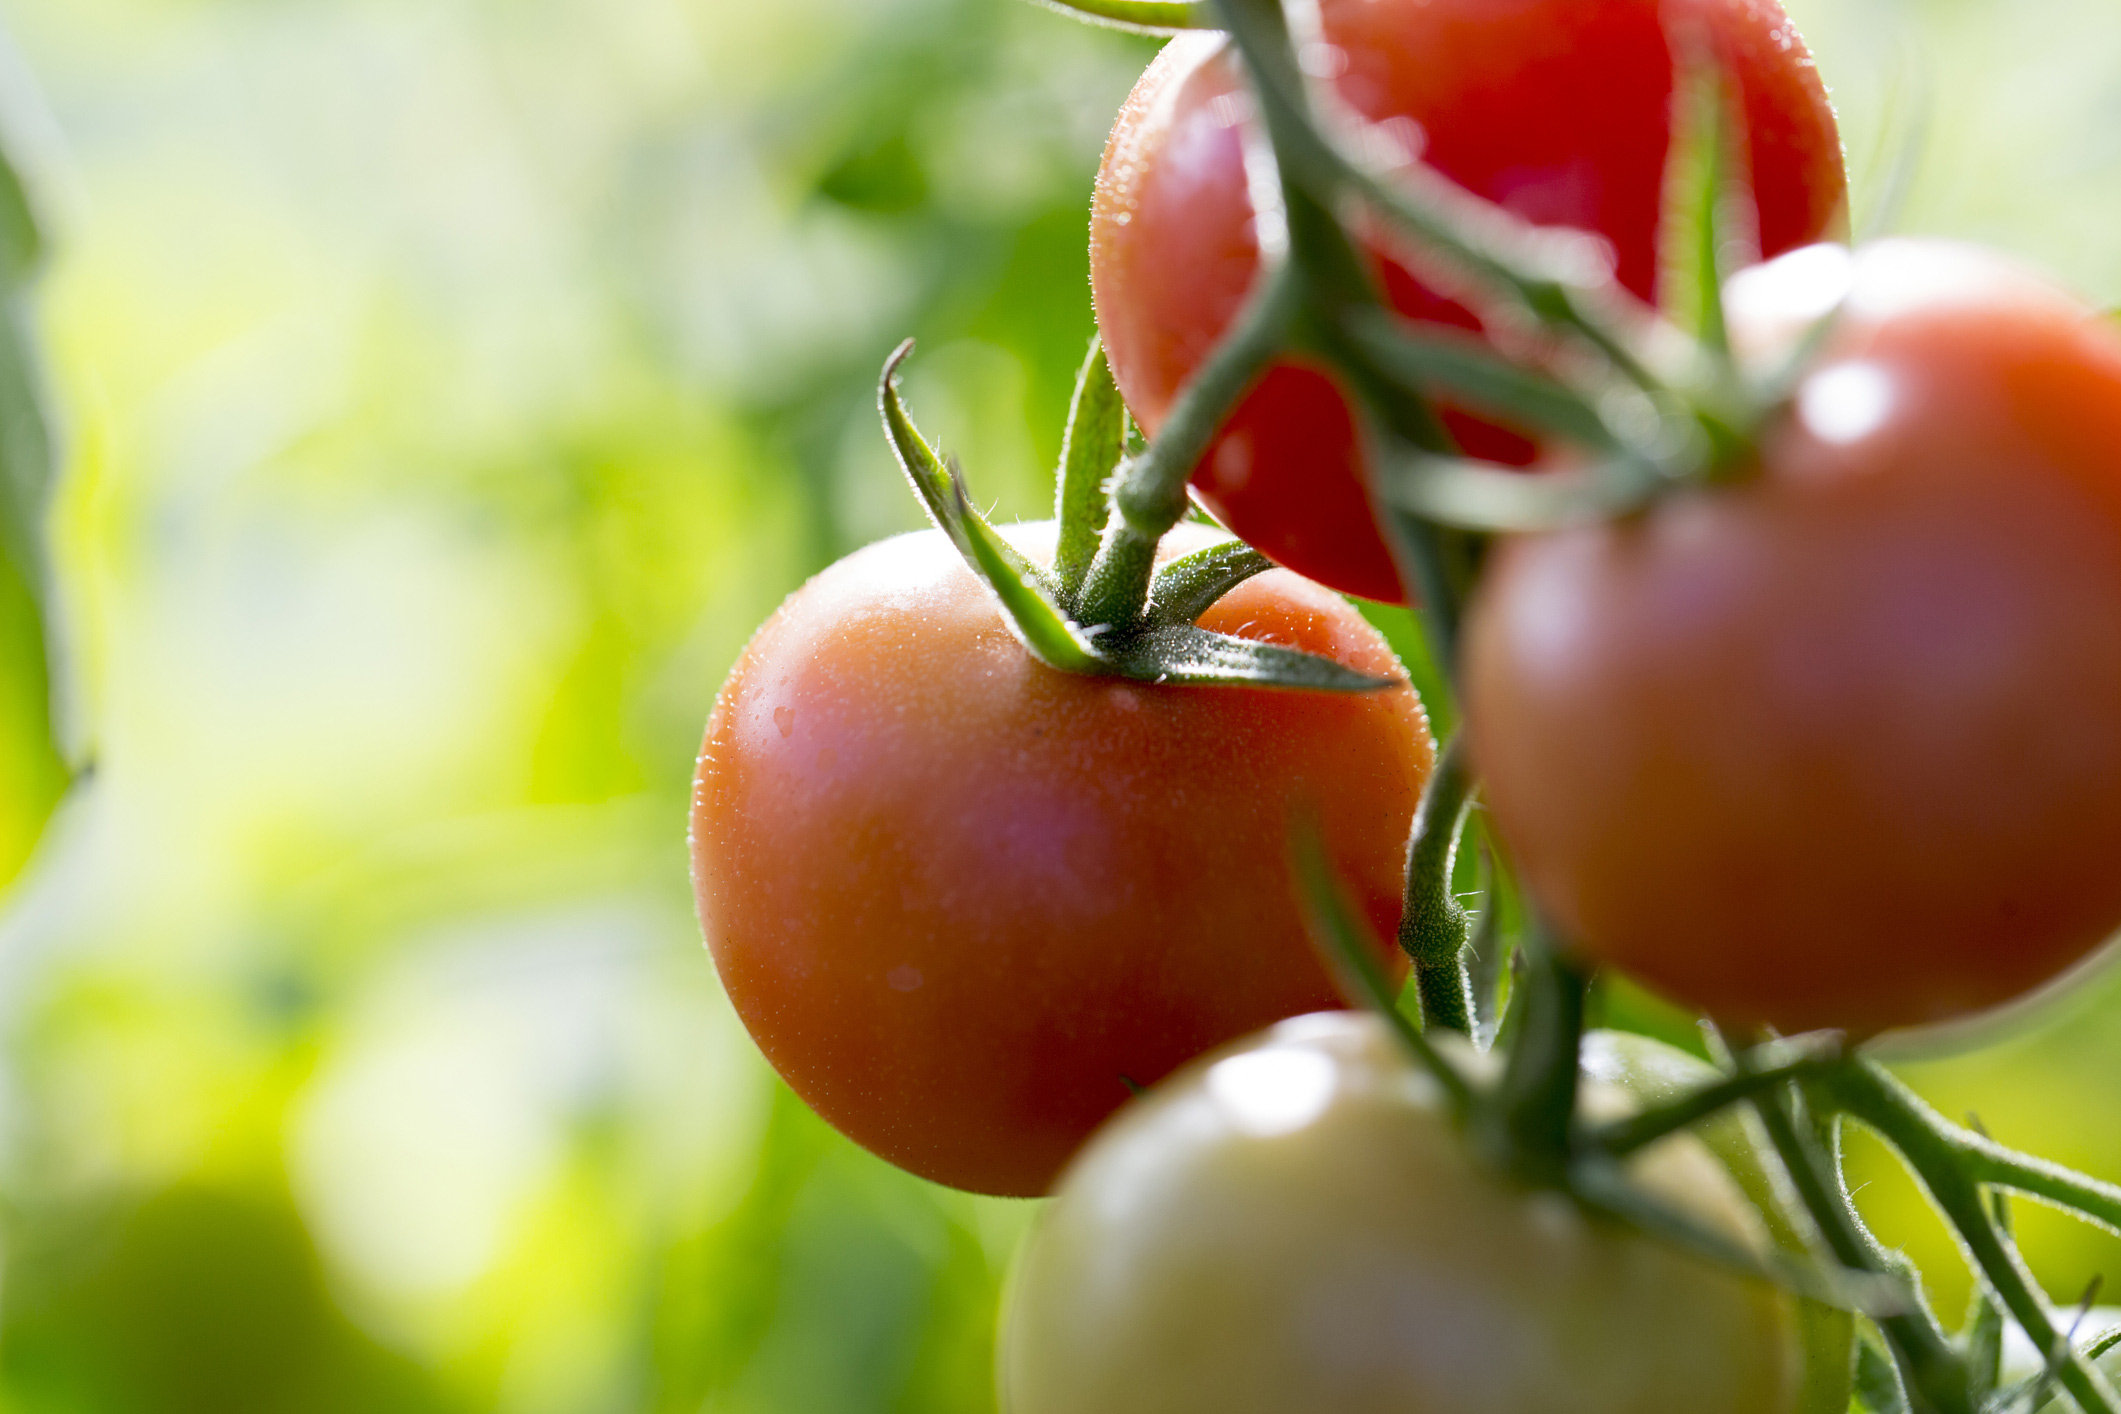 Top heart healthy foods: tomatoes